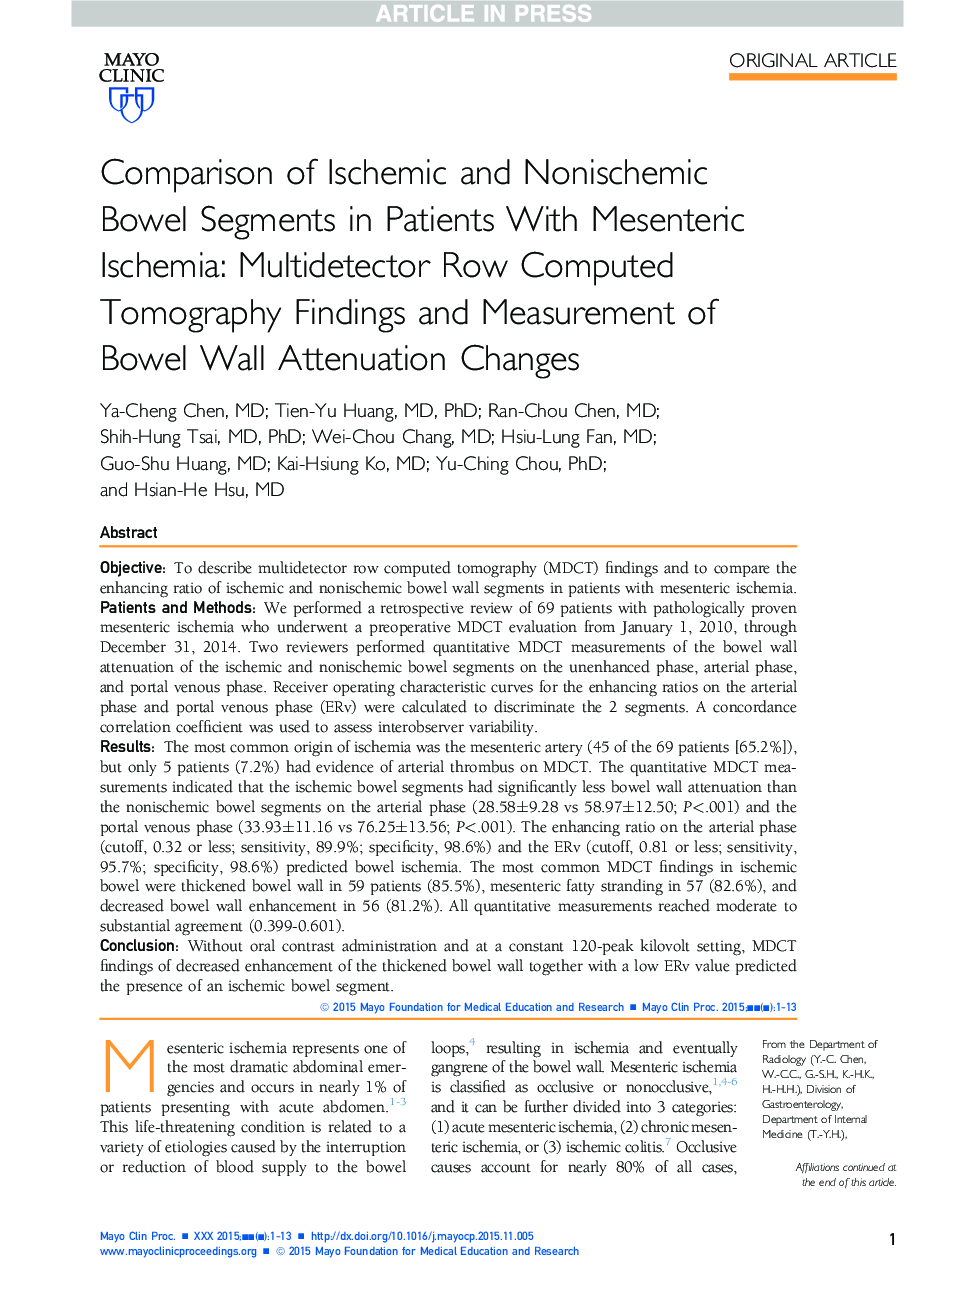 Comparison of Ischemic and Nonischemic Bowel Segments in Patients With Mesenteric Ischemia: Multidetector Row Computed Tomography Findings and Measurement of Bowel Wall Attenuation Changes